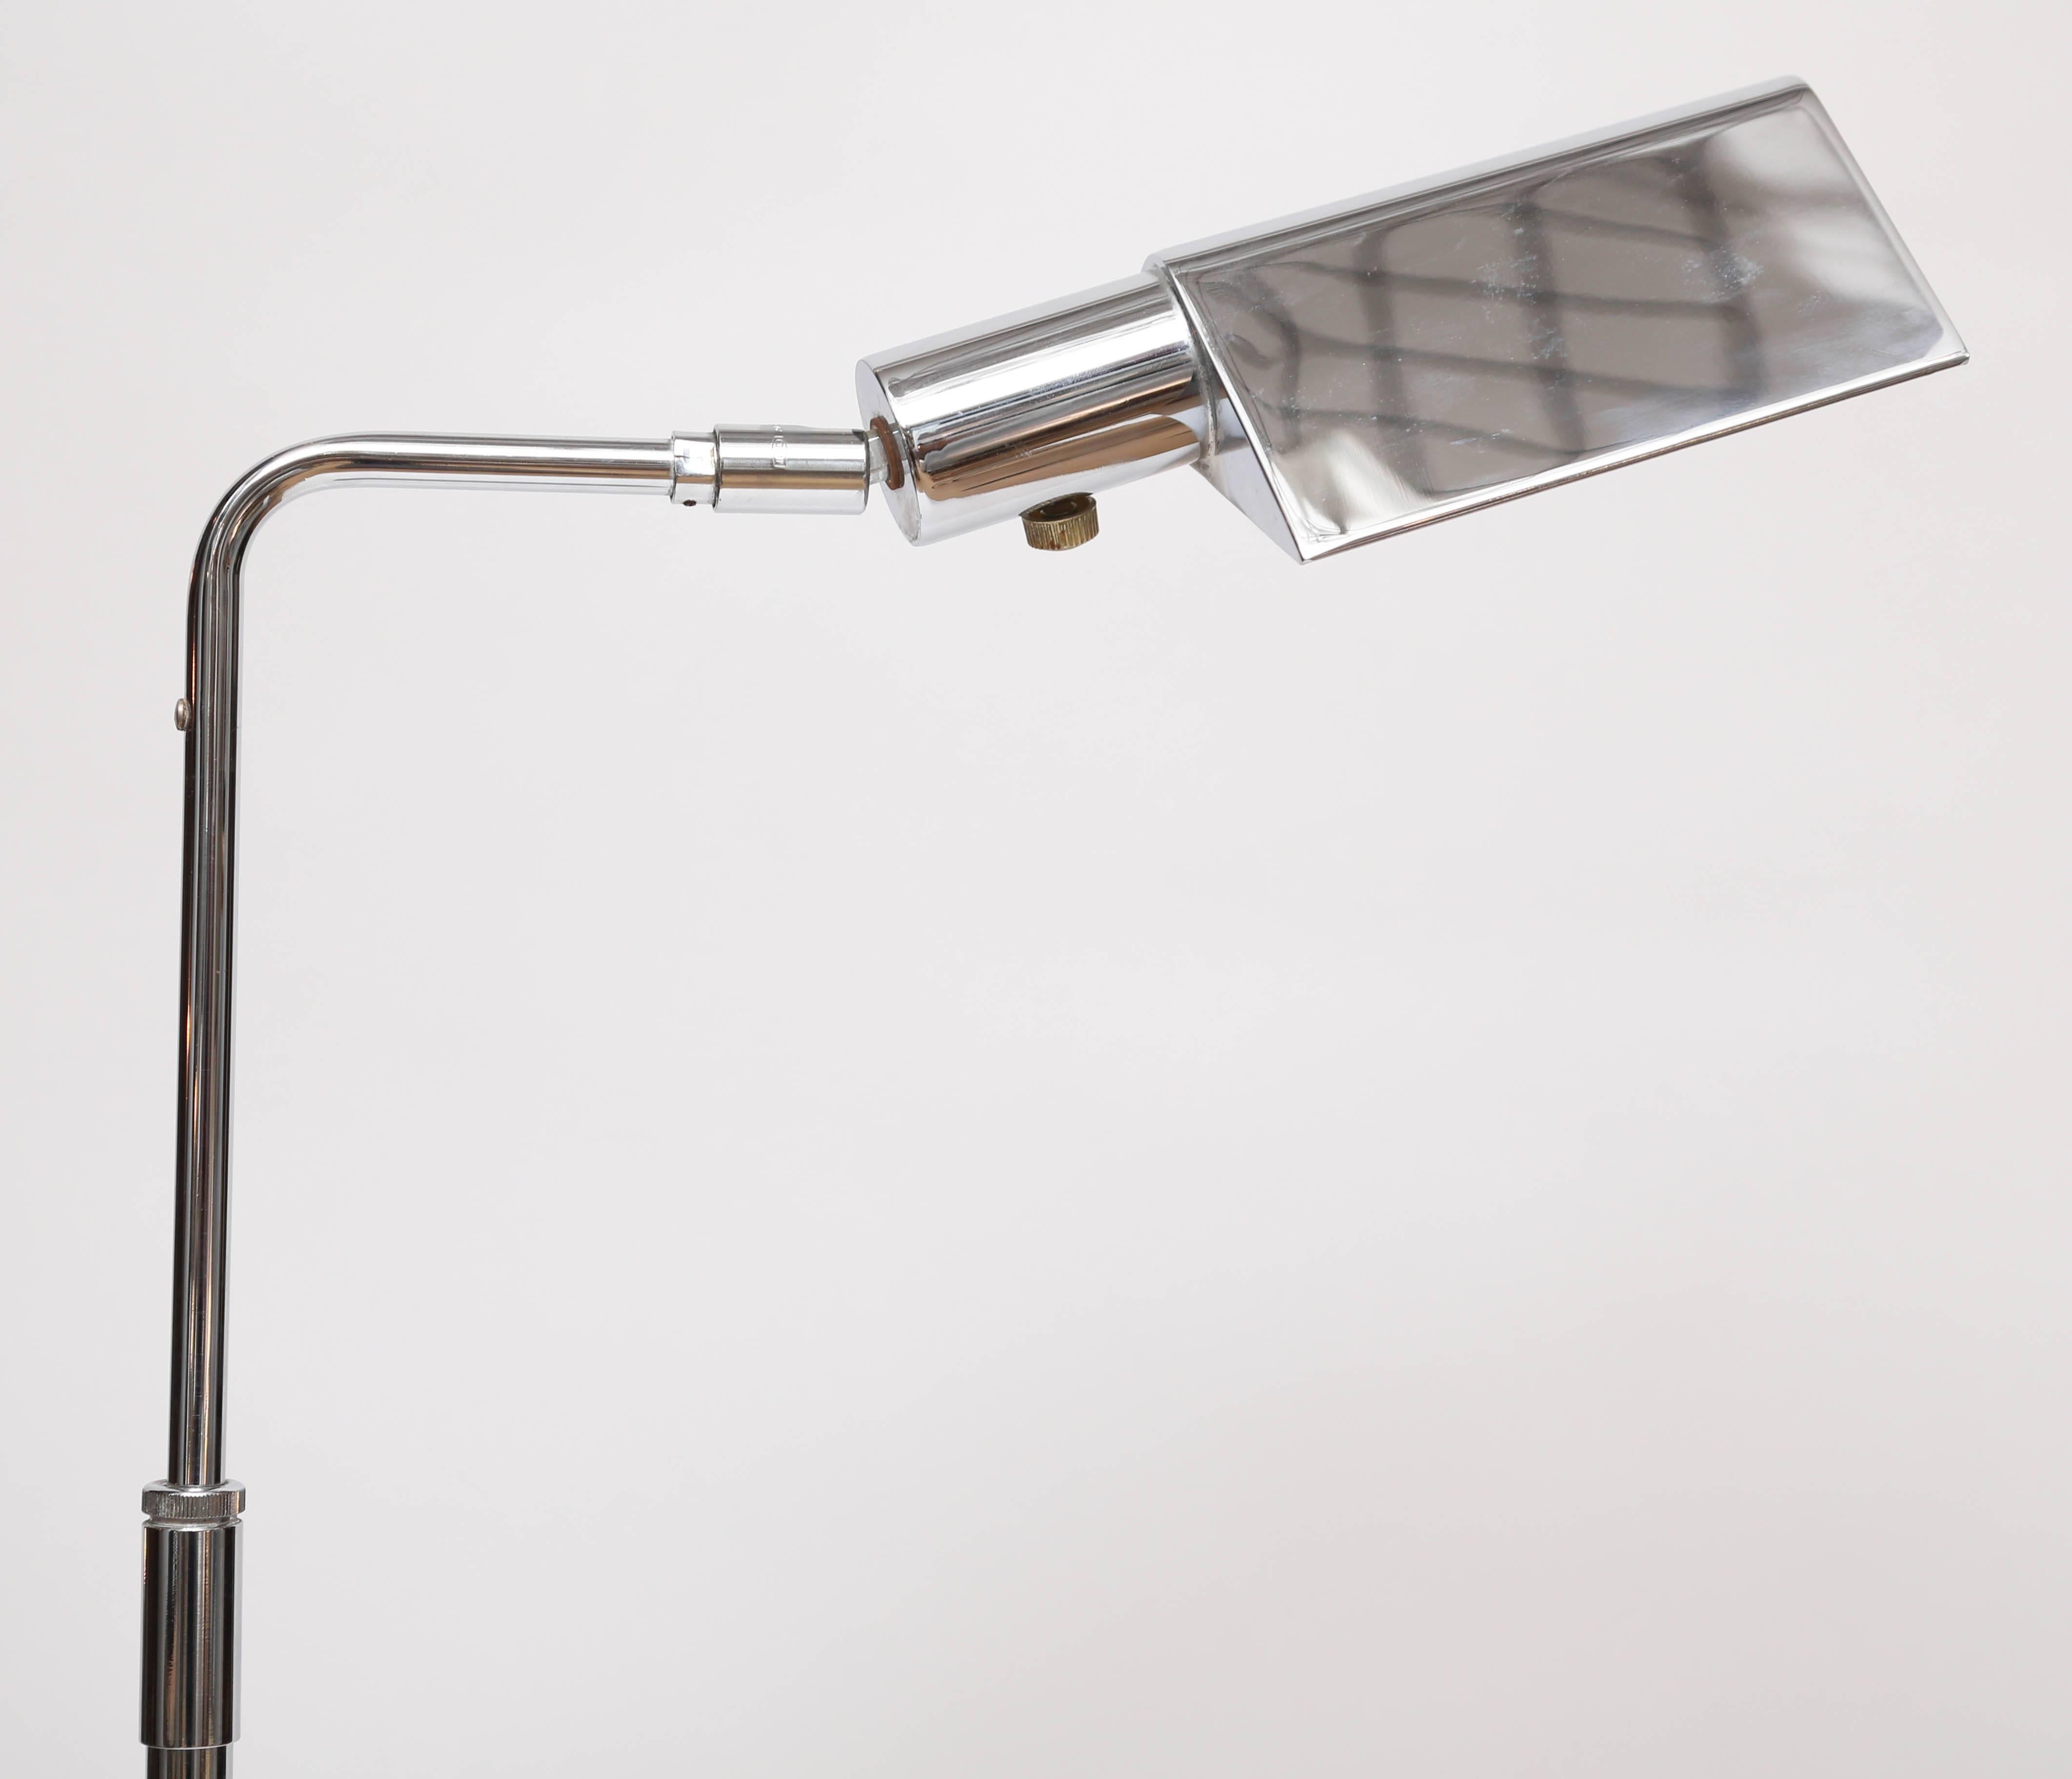 Exquisite chrome floor lamp by Koch & Lowy, circa 1970s. Adjustable height stem with tent shade that tilts and swivels. Excellent vintage condition.
Measures: Base 9.25